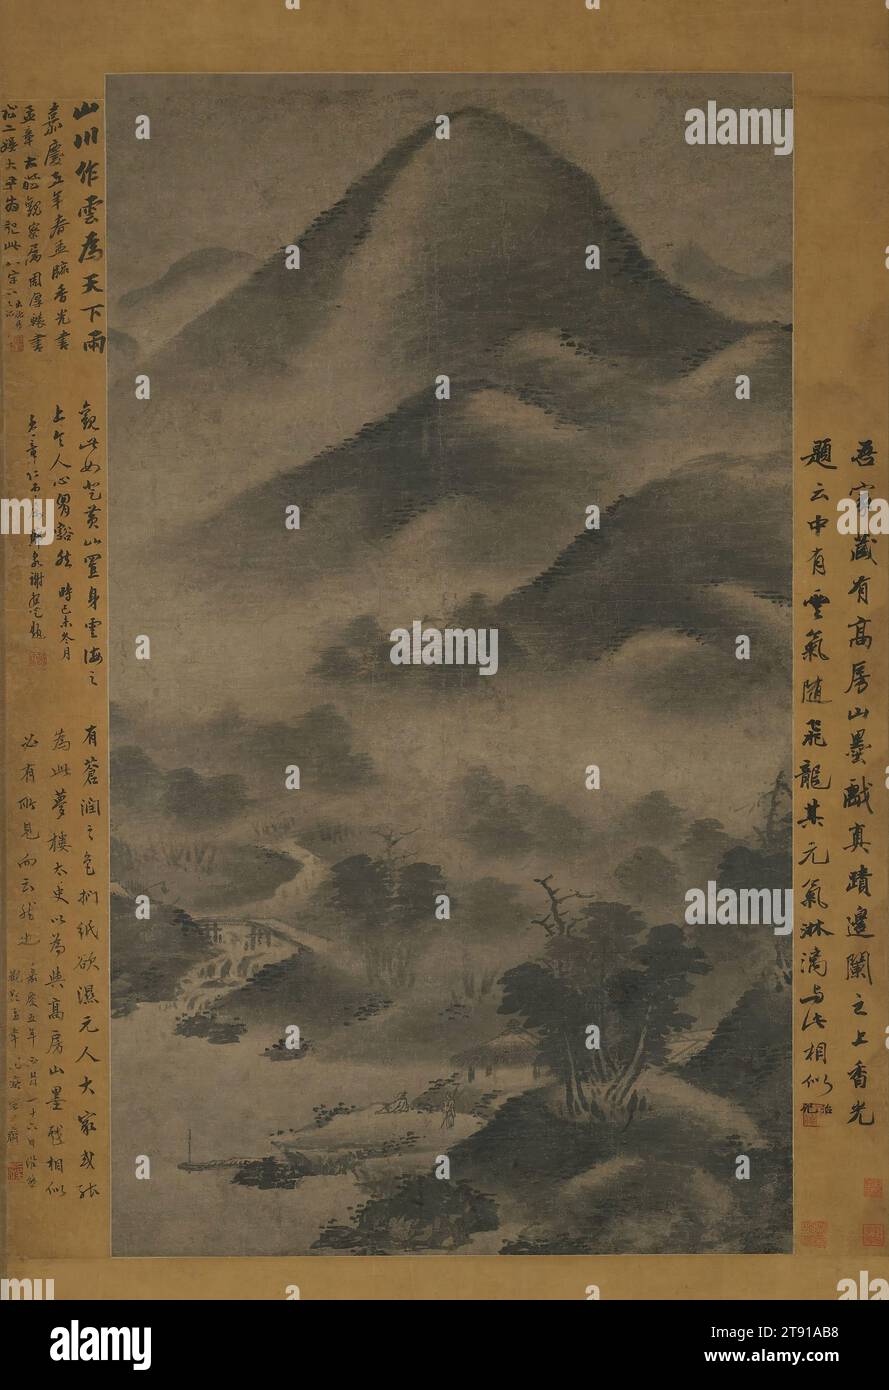 Landscape in the Style of Mi Fu, 14th century, Attributed to Gao Kegong, 1248 - 1310, 42 x 15-5/16 in. (106.7 x 38.9 cm), Ink on paper, China, 14th century, A colophon (mark or inscription) on the mounting of this painting written by renowned painter and calligrapher Wang Wenzhi (1730–1802) attributes it to the important Yuan artist Gao Kegong. (Eminent artists were often invited to write colophons to authenticate or simply to increase the value of the works.) Technically and conceptually, this moistly atmospheric landscape is a clear link to an earlier tradition begun by Mi Fu Stock Photo